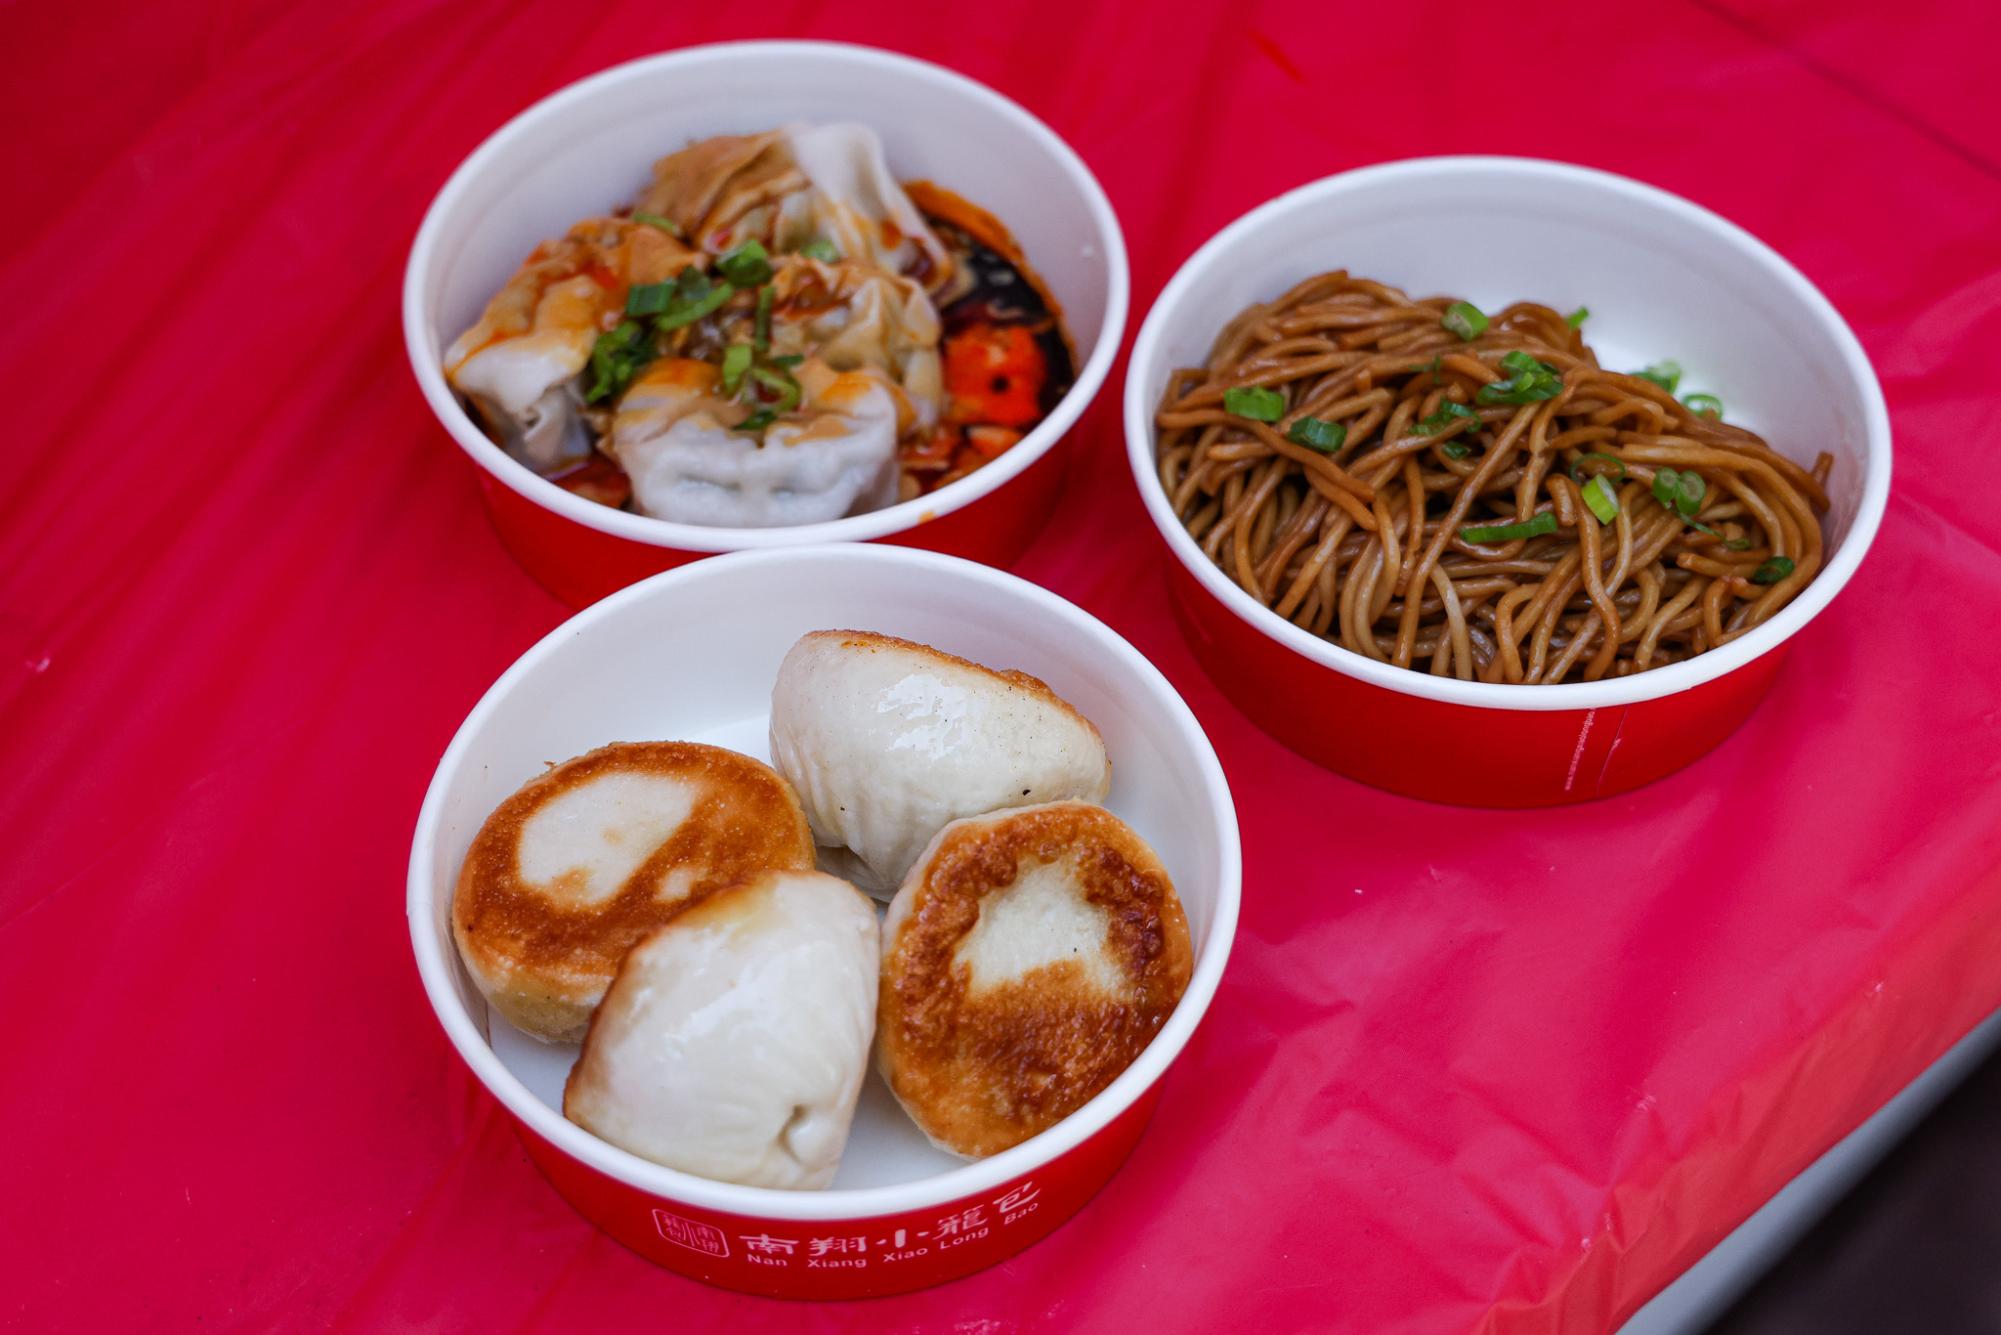 Three serving cups for festival guests with fried dumplings, soup dumplings and noodles.